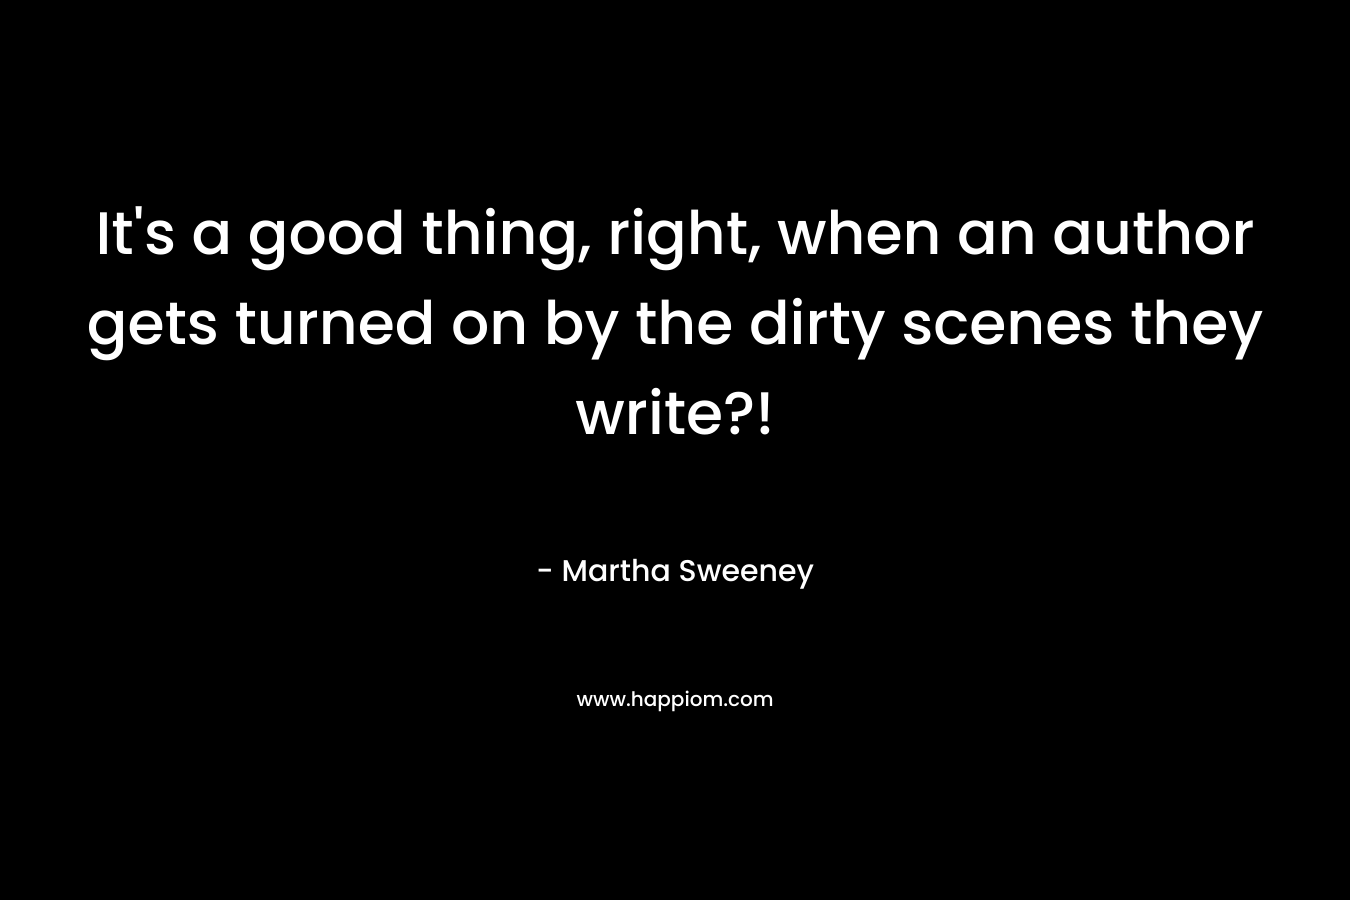 It’s a good thing, right, when an author gets turned on by the dirty scenes they write?! – Martha Sweeney